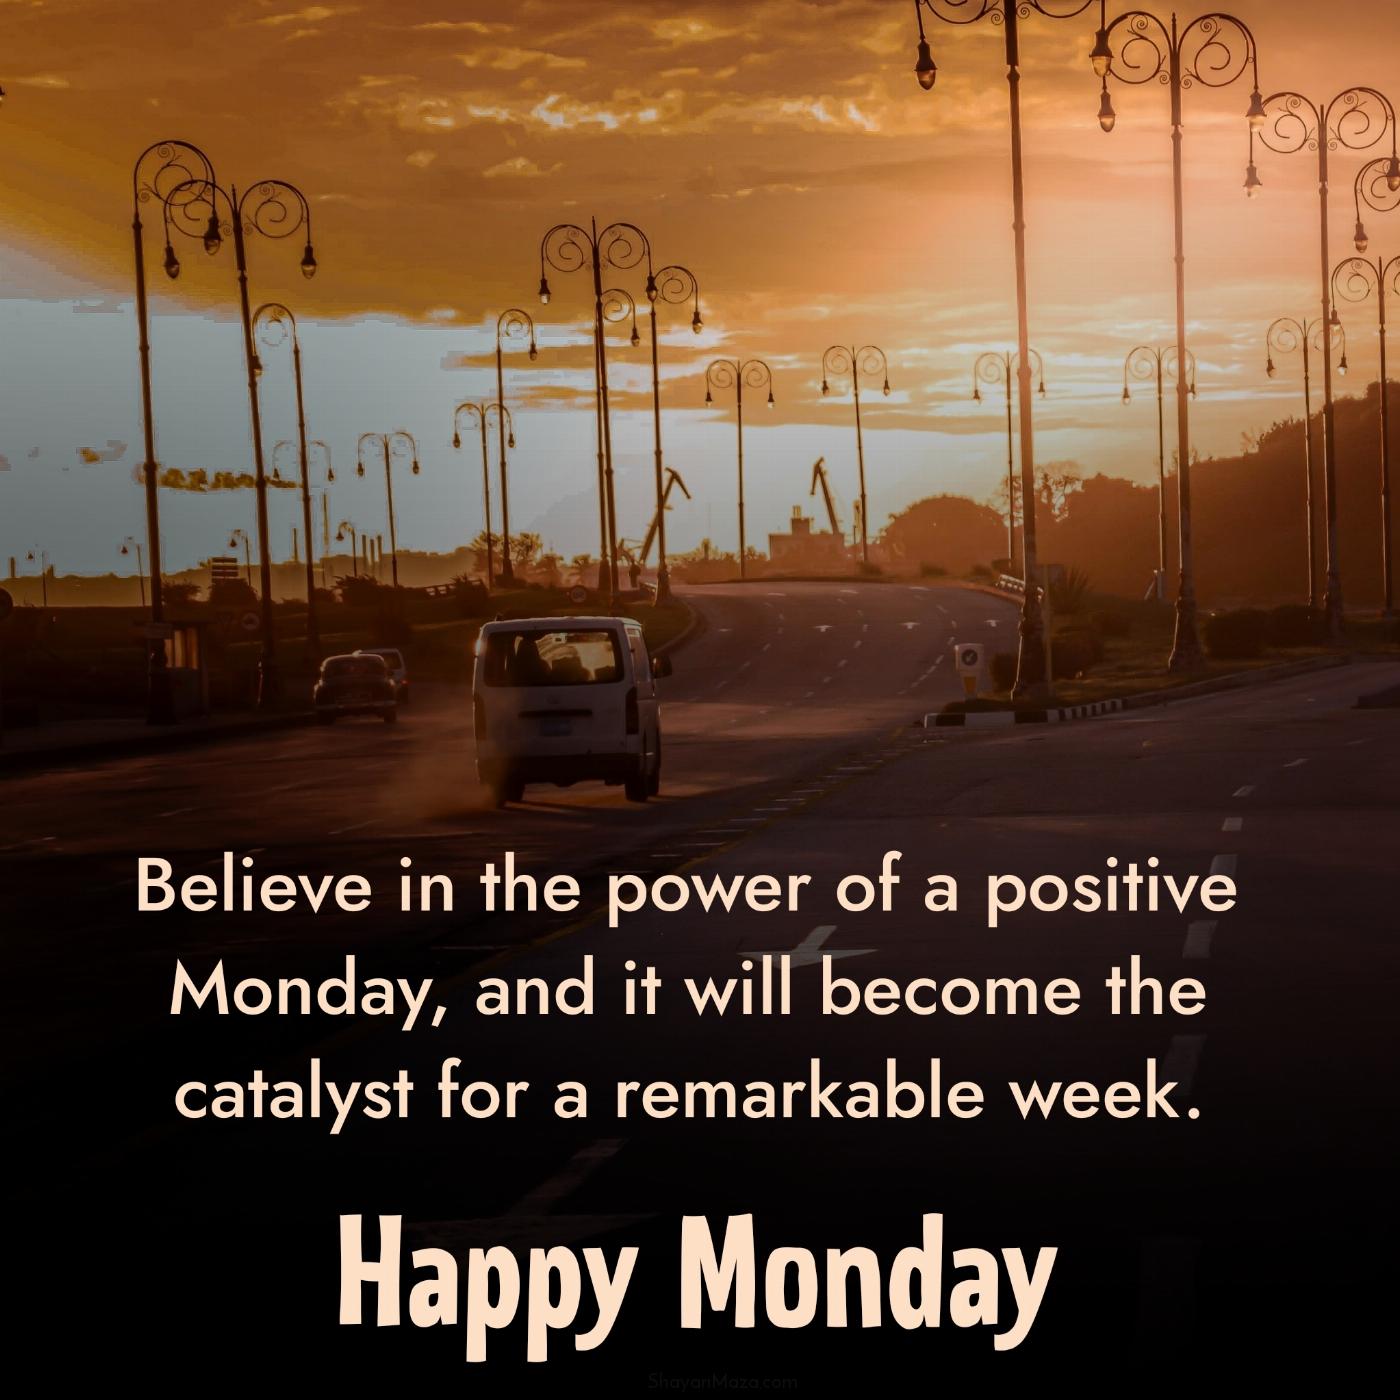 Believe in the power of a positive Monday and it will become